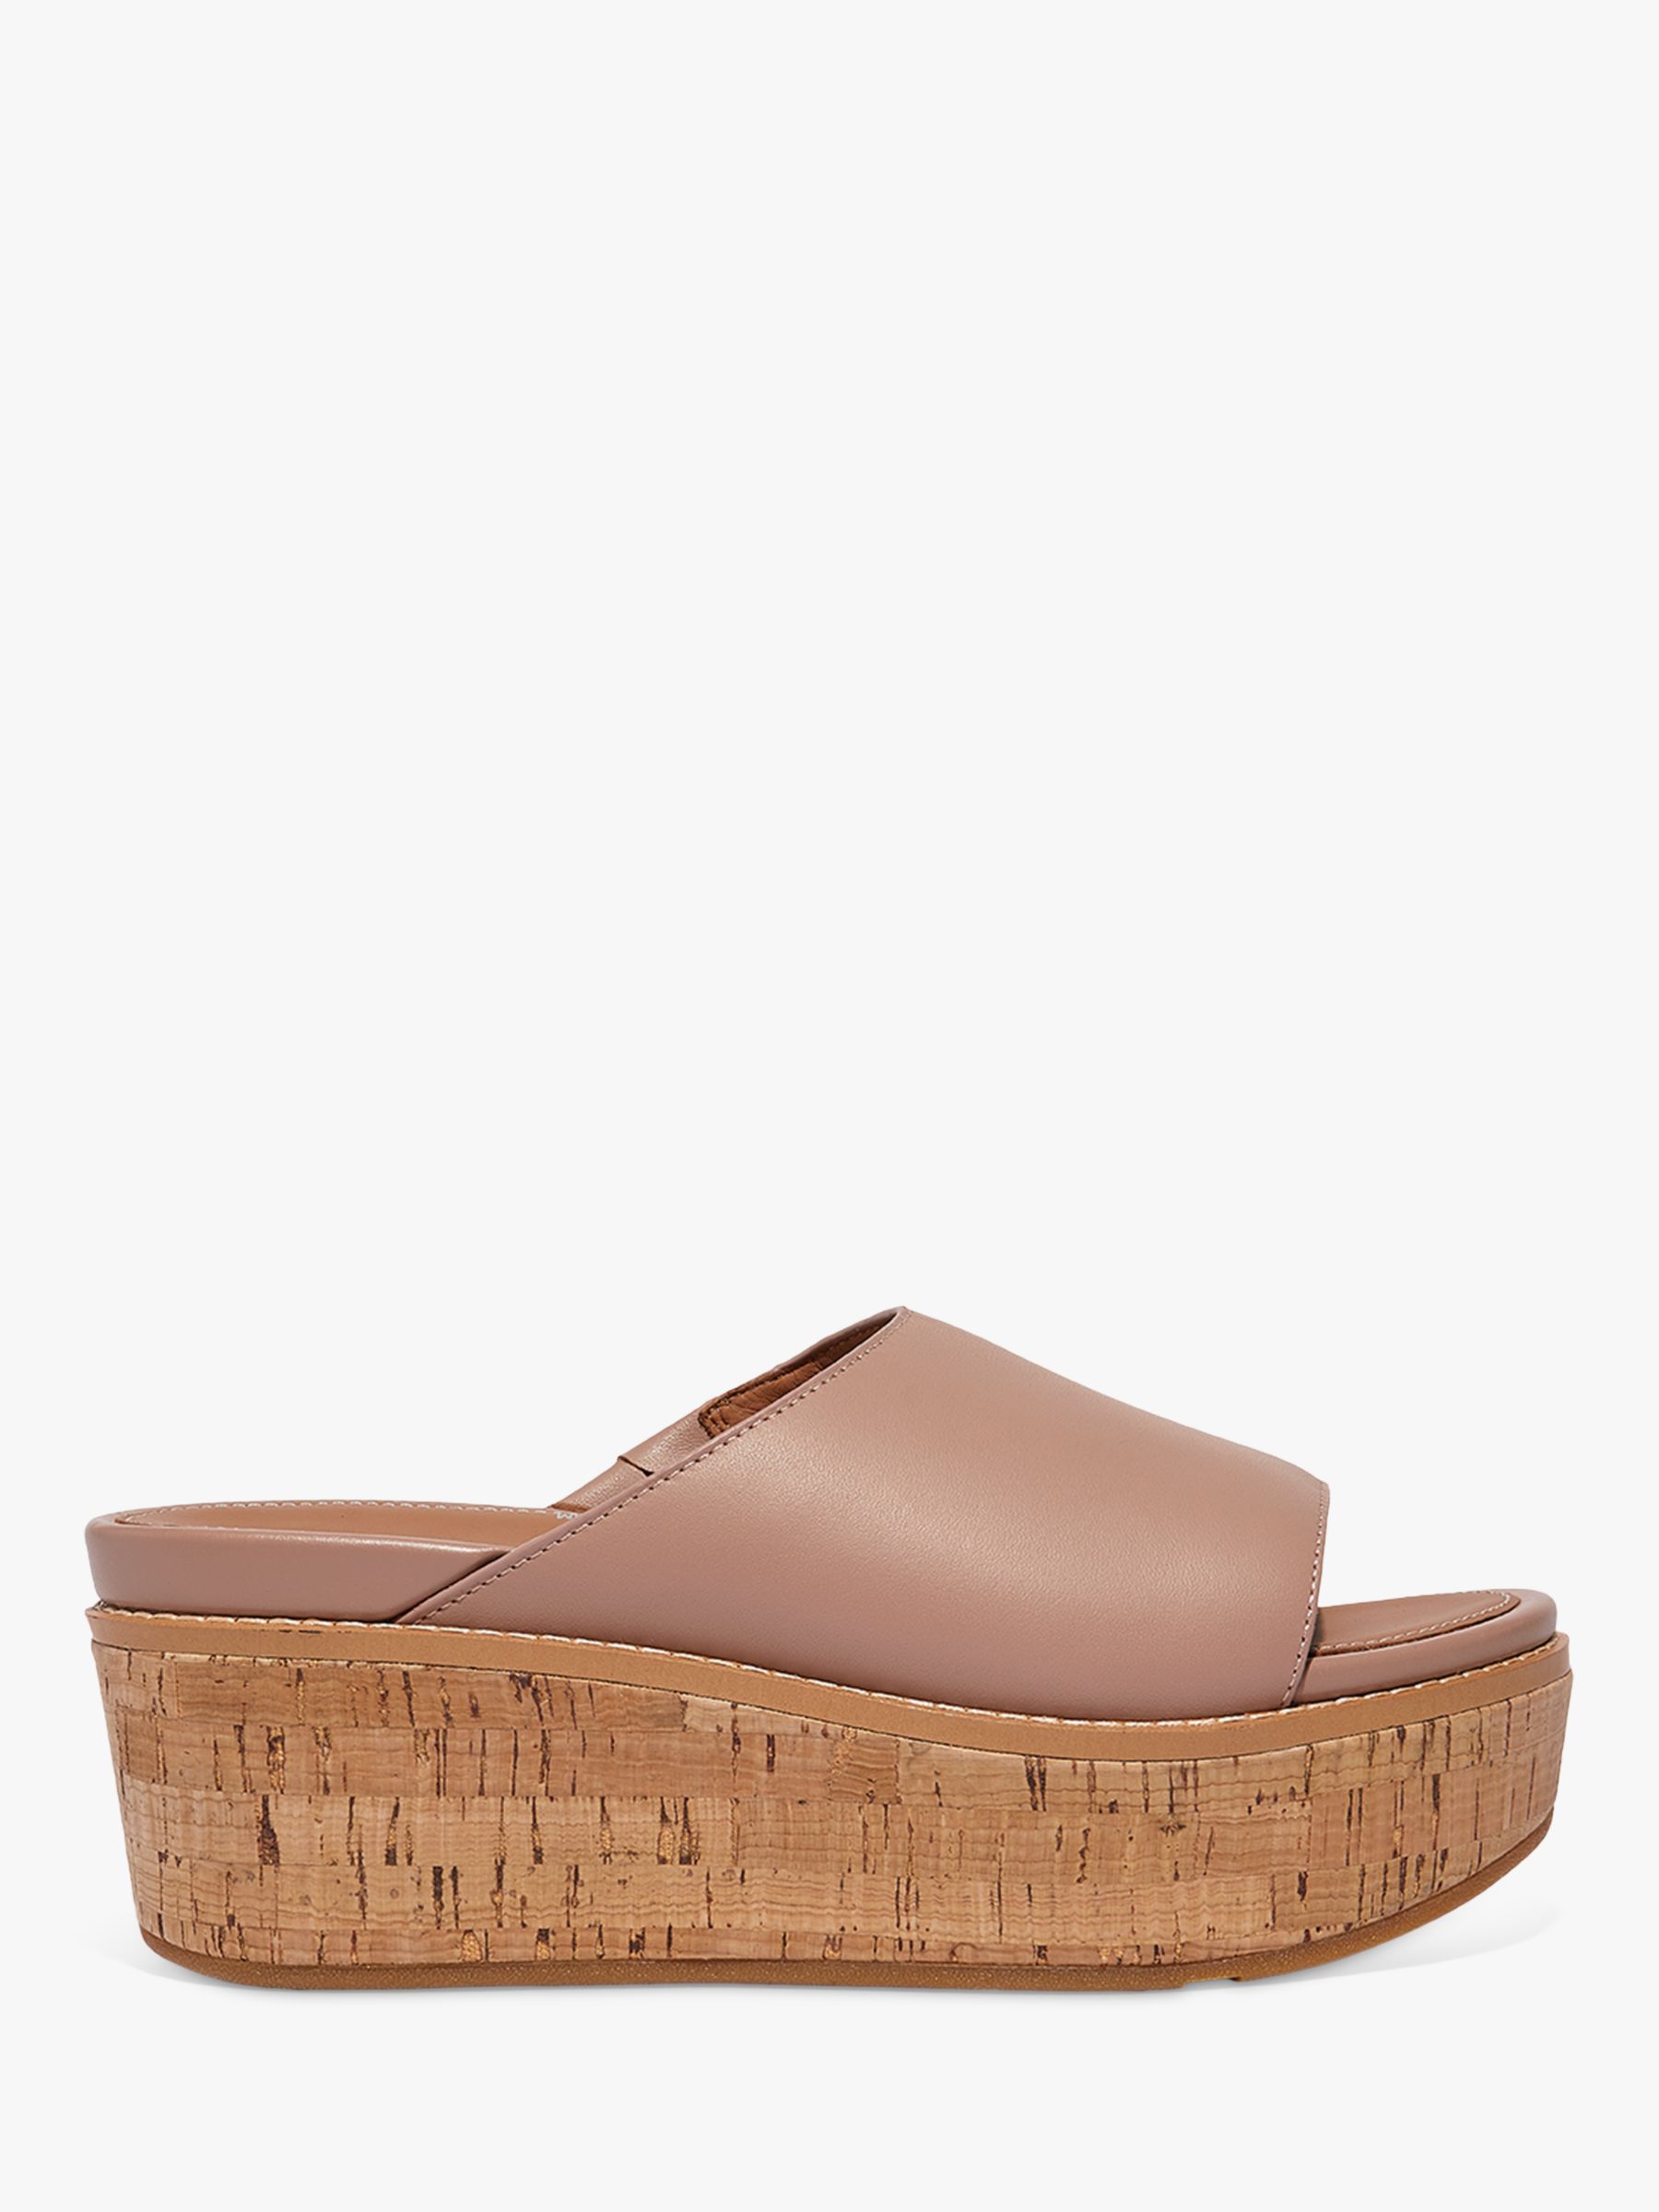 Buy FitFlop Eloise Leather Wedge Heel Mules Online at johnlewis.com